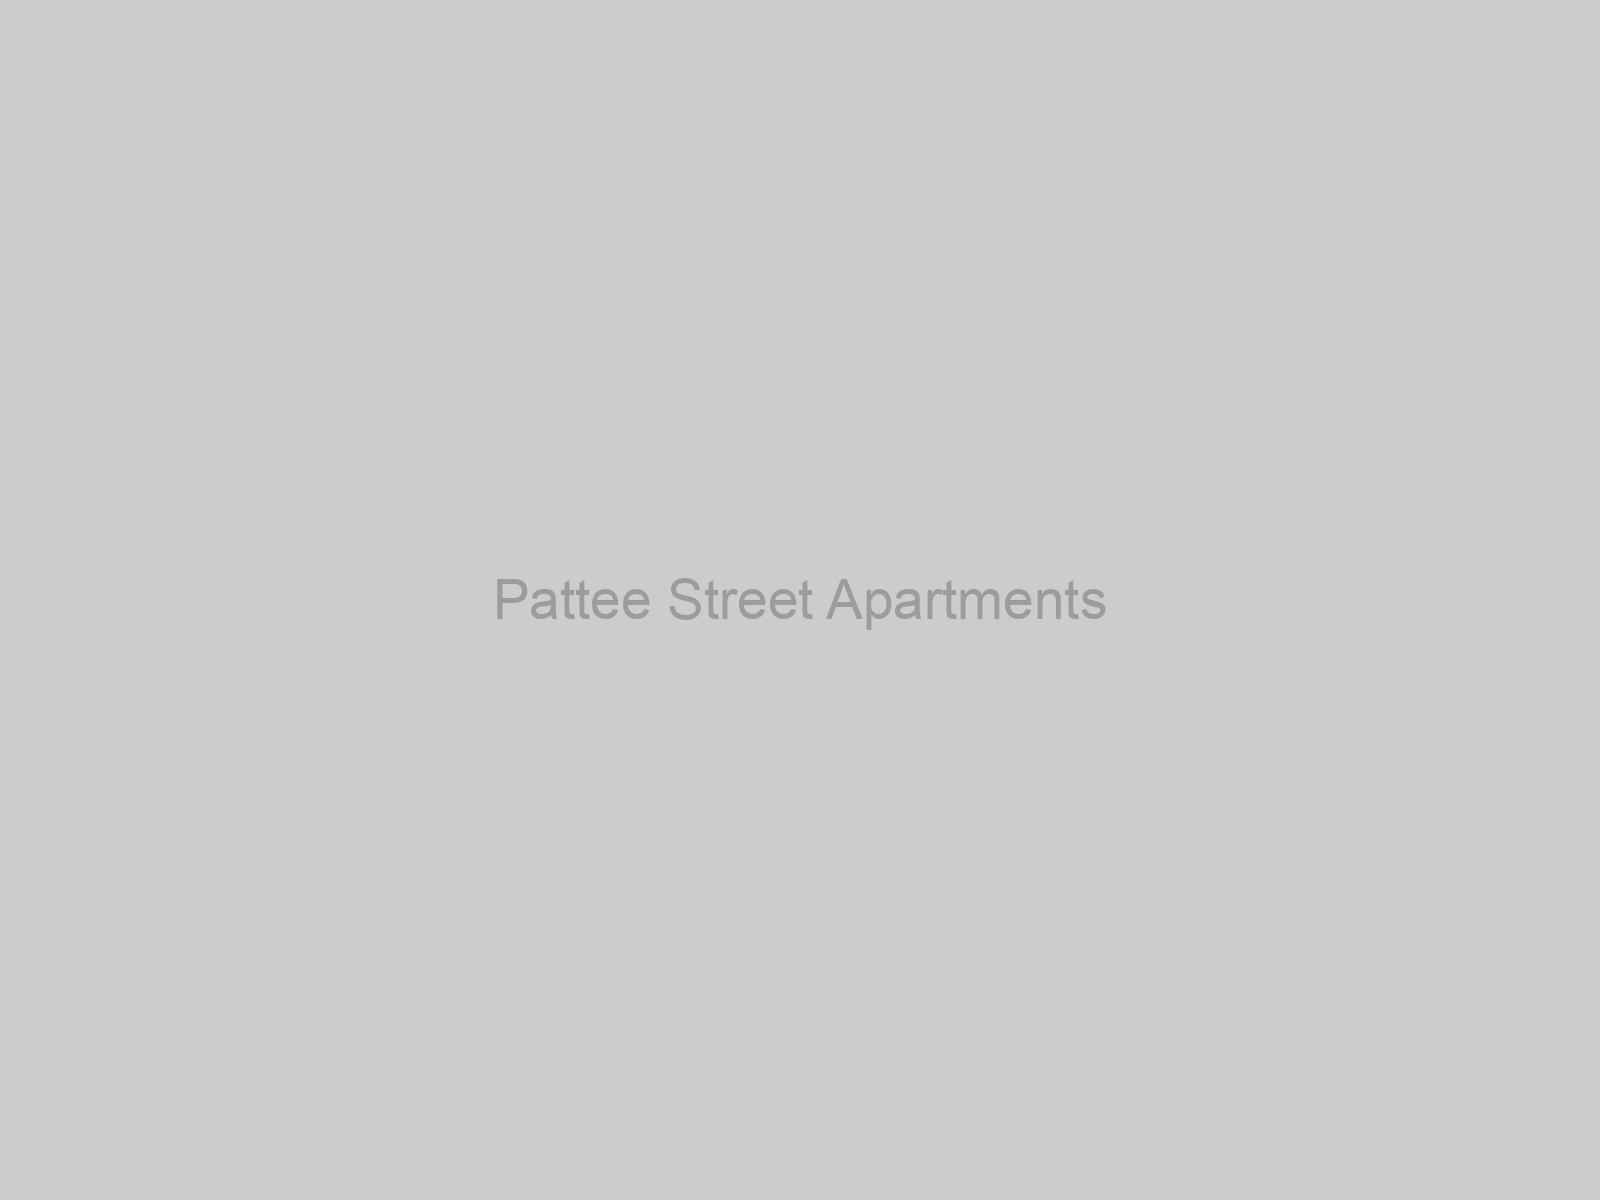 Pattee Street Apartments